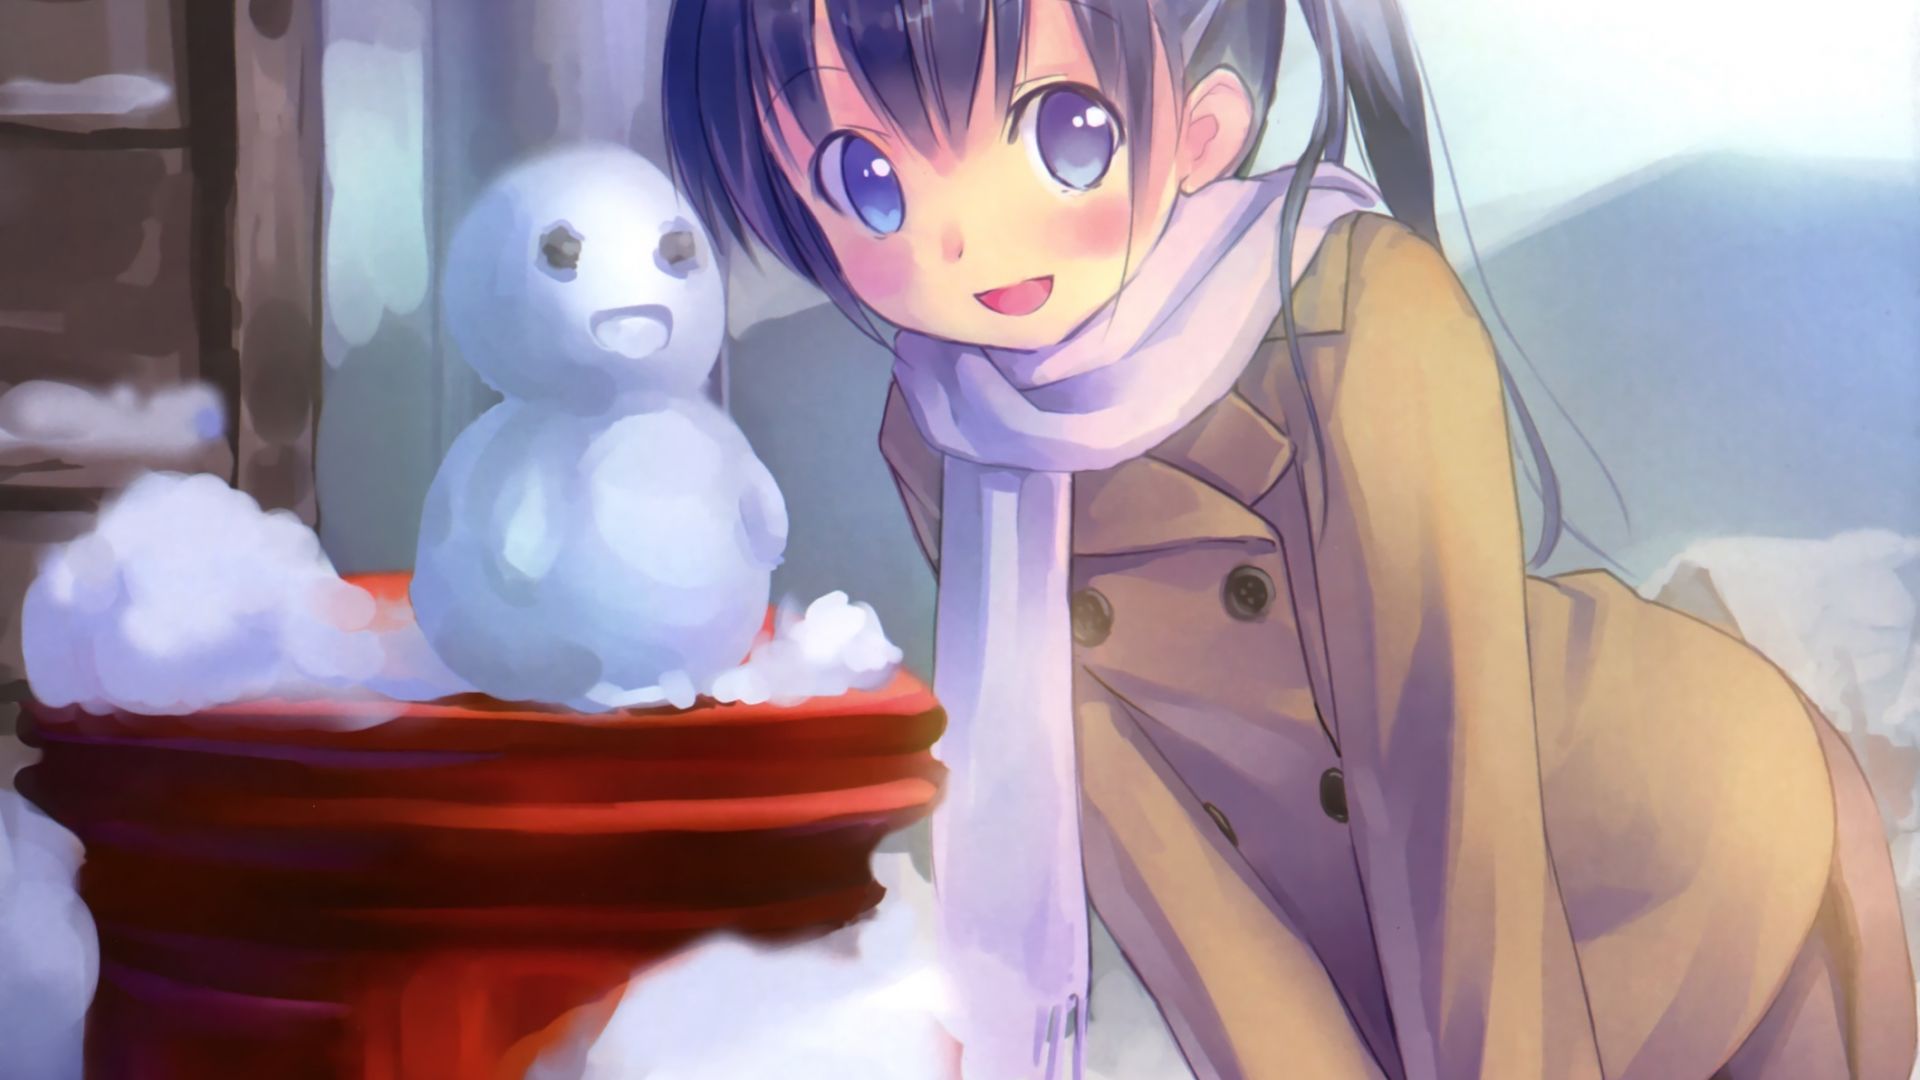 Desktop Wallpaper Scarf, Play, Winter Snow, Anime Girl, HD Image, Picture, Background, Cim Ue